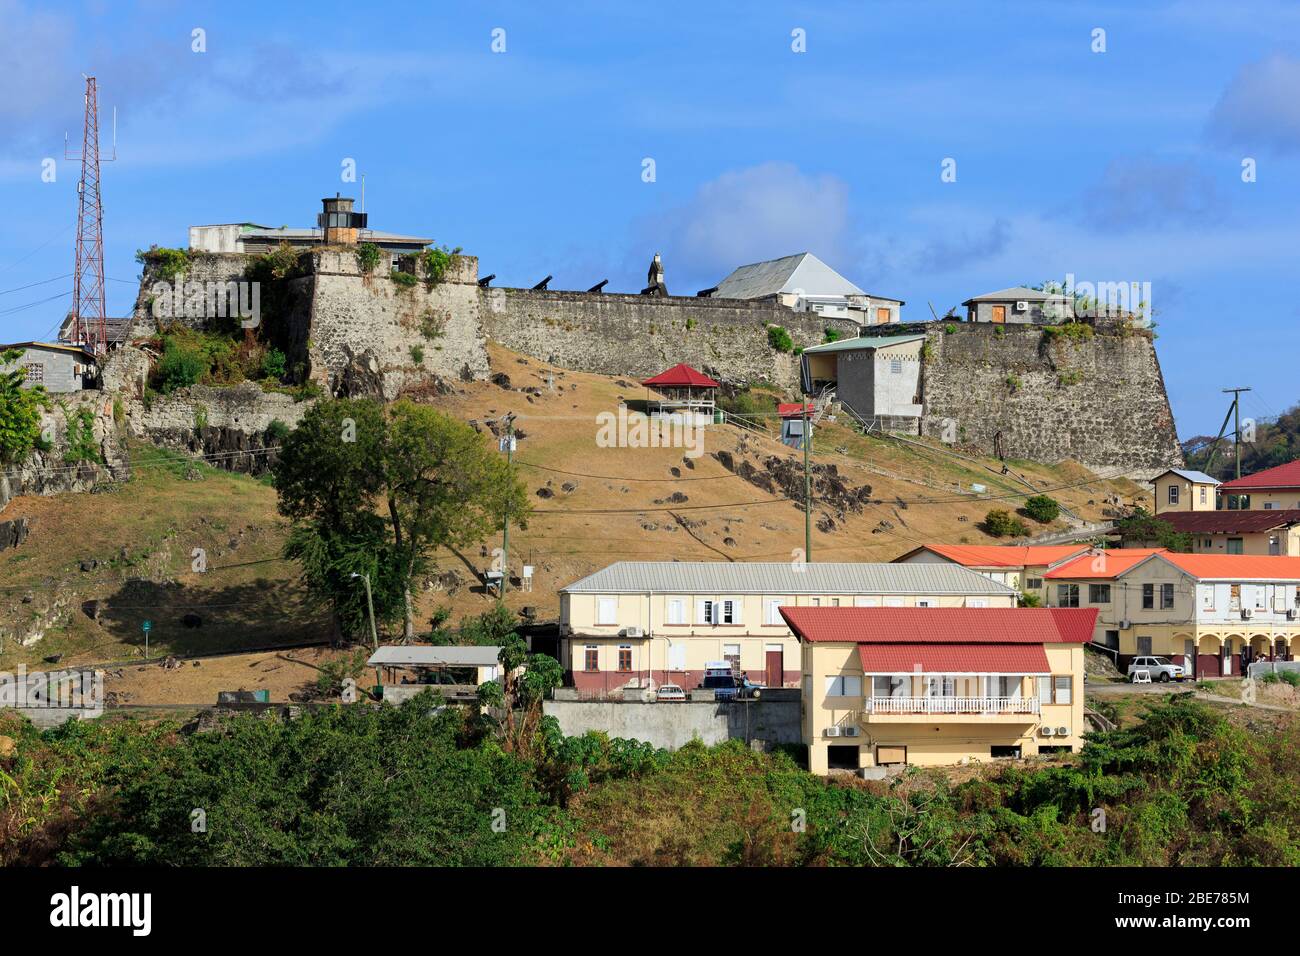 Fort George,St. Georges,Grenada,Caribbean Stock Photo